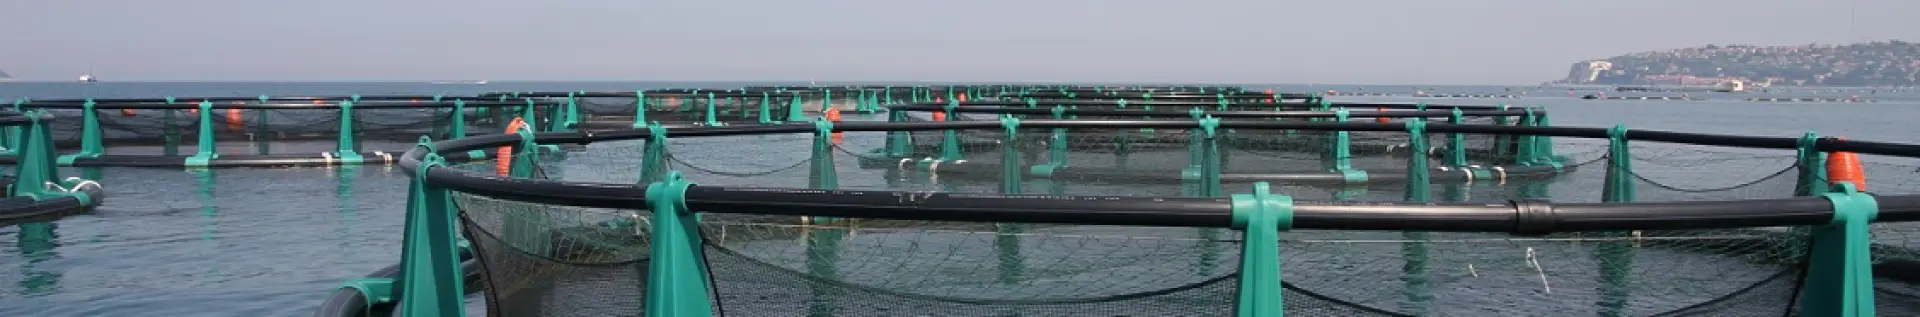 Cages for fish farming and aquaculture with a circular or sq...